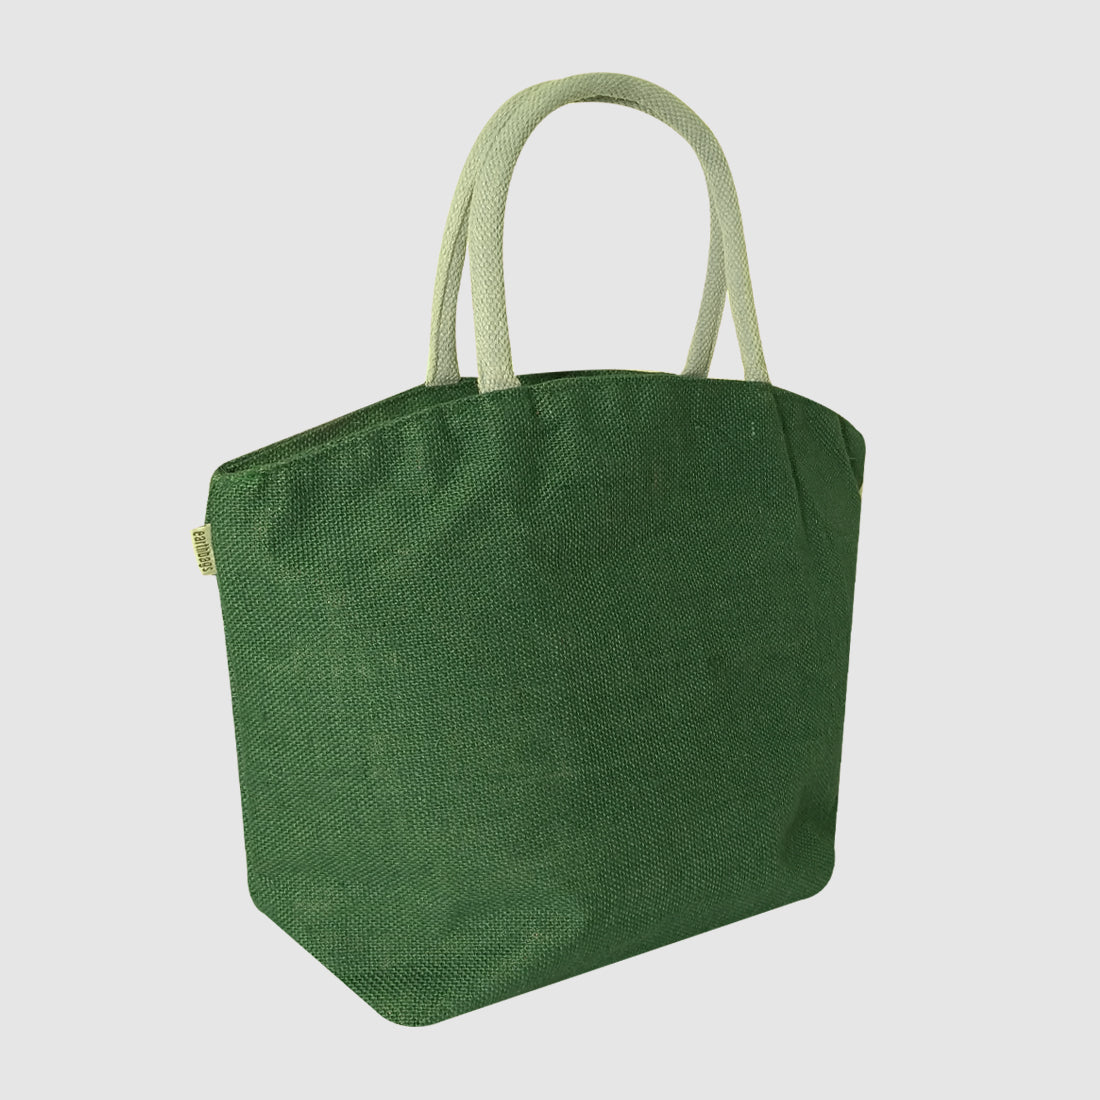 EARTHBAGS JUTE TOTE BAG WITH ZIPPER AND POCKET